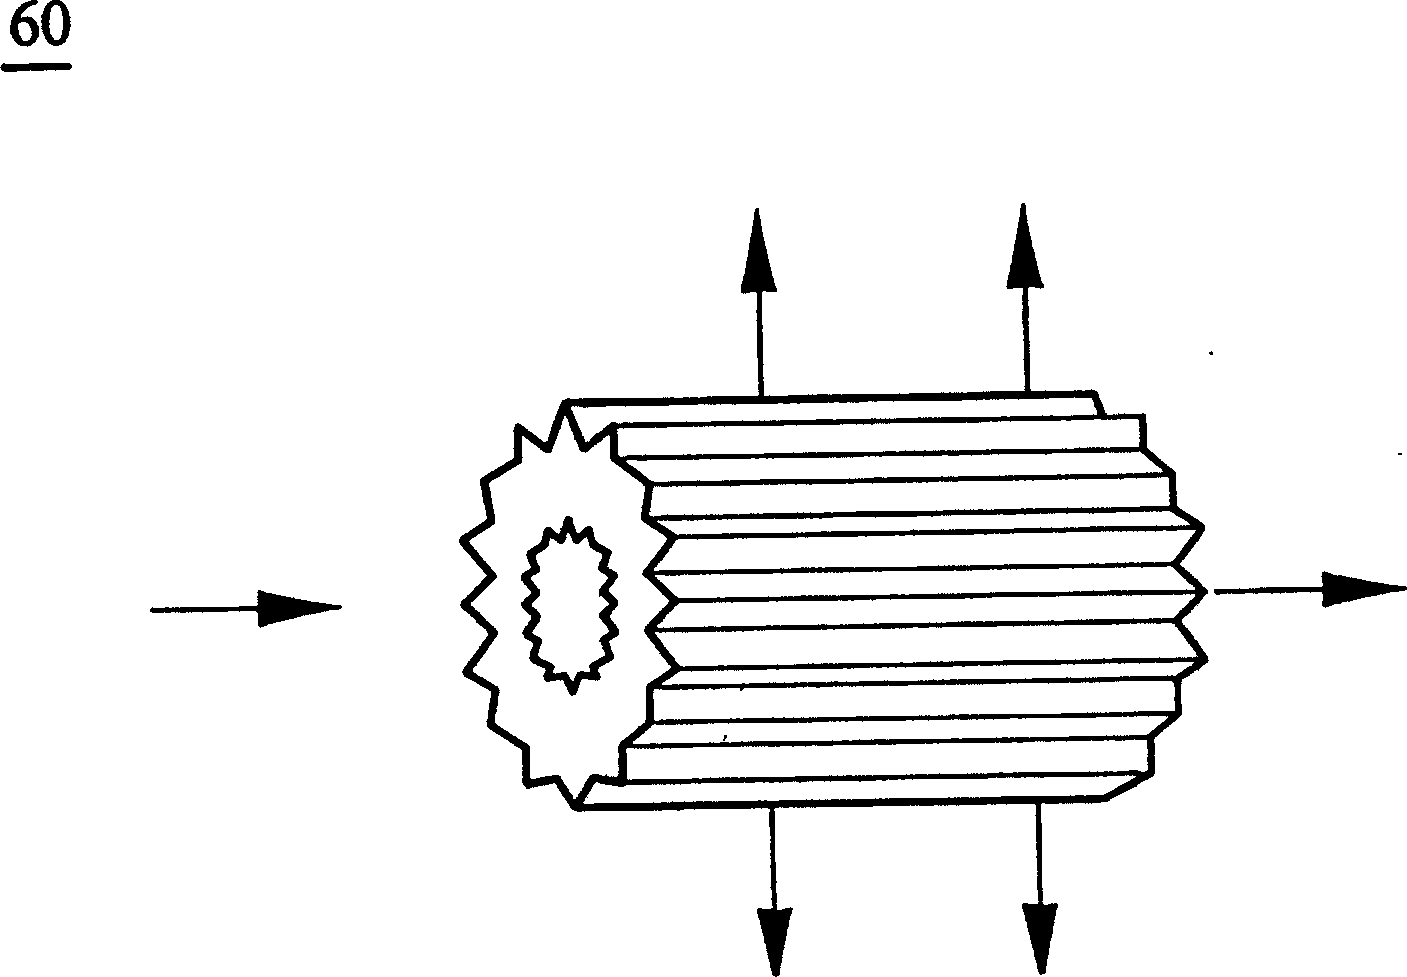 Air intake arrangement of isolating chamber